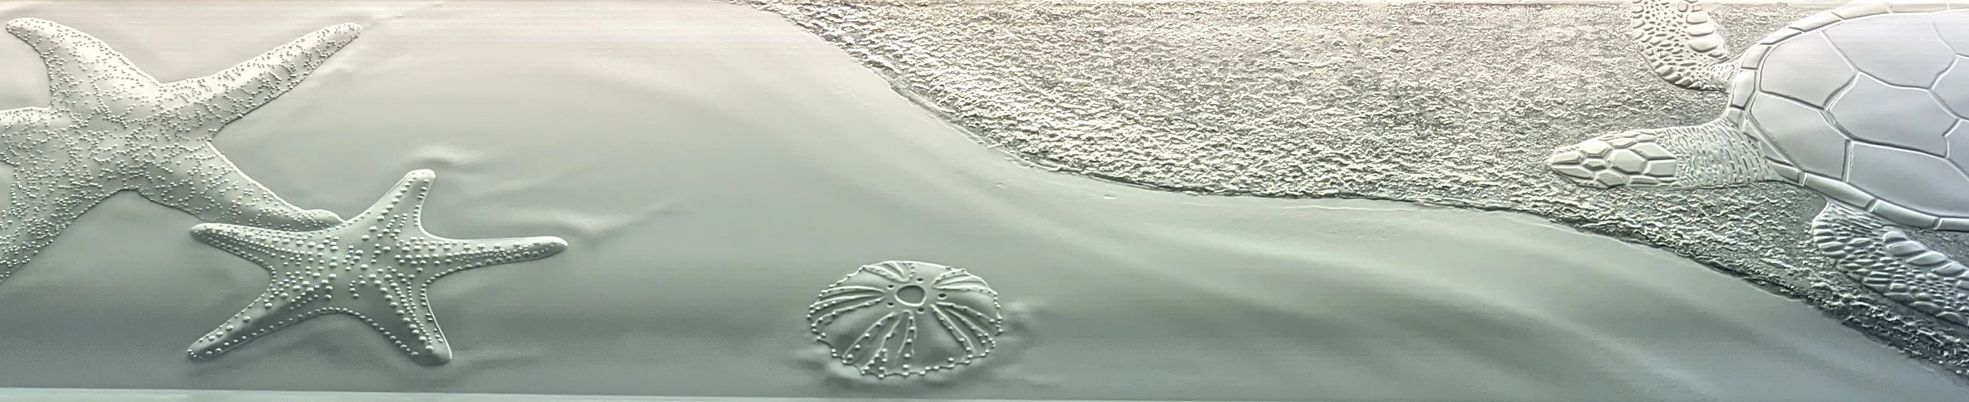 Carved glass table top - Turtle and Starfish